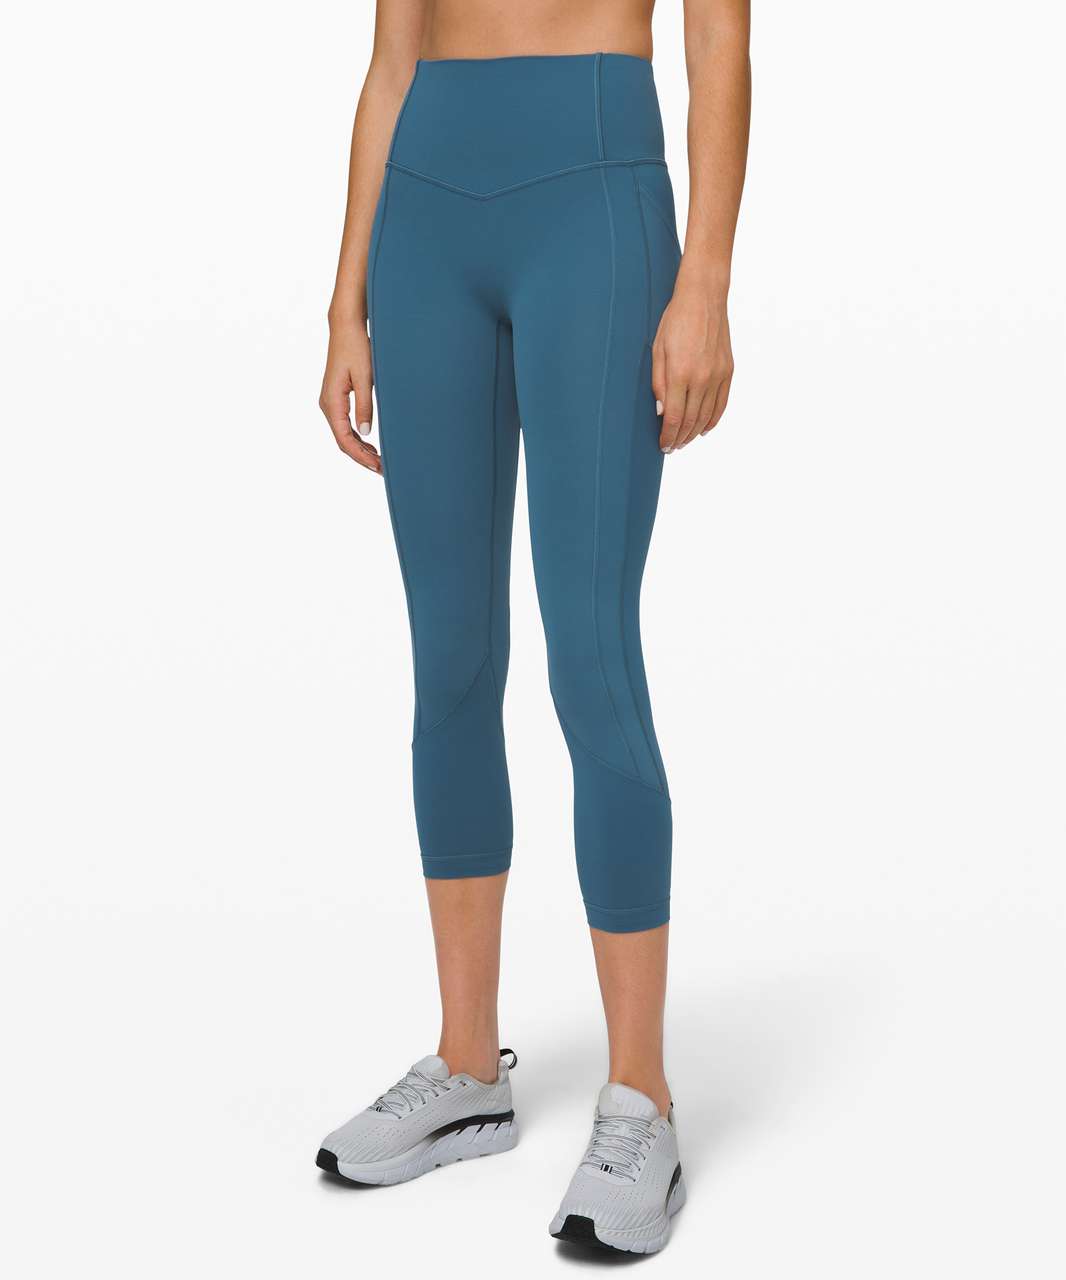 Lululemon All The Right Places Crop II *23" - Petrol Blue